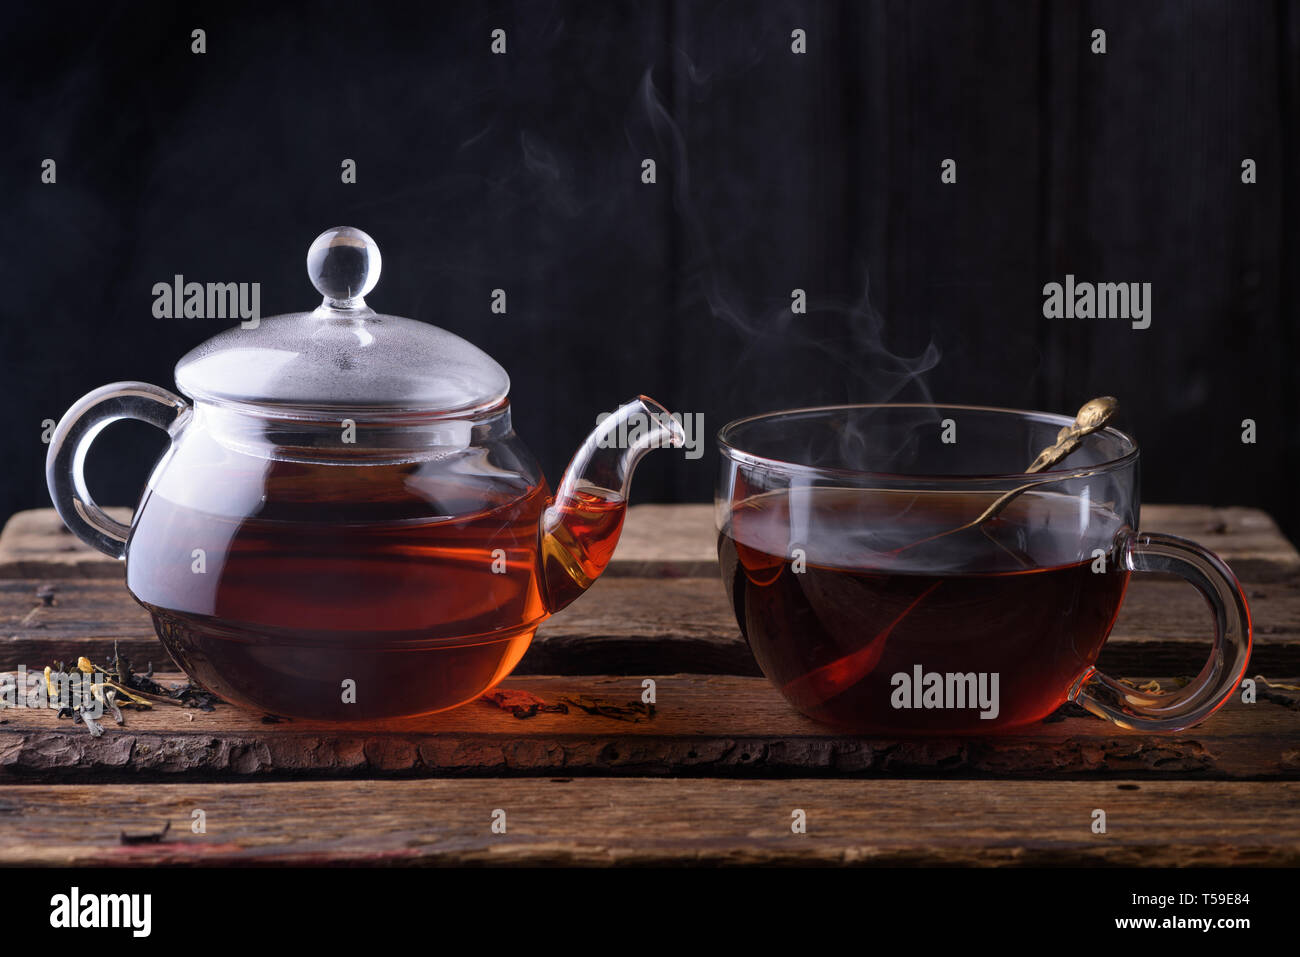 https://c8.alamy.com/comp/T59E84/hot-tea-in-glass-teapot-and-cup-with-spoon-and-steam-on-wooden-table-dark-still-life-T59E84.jpg